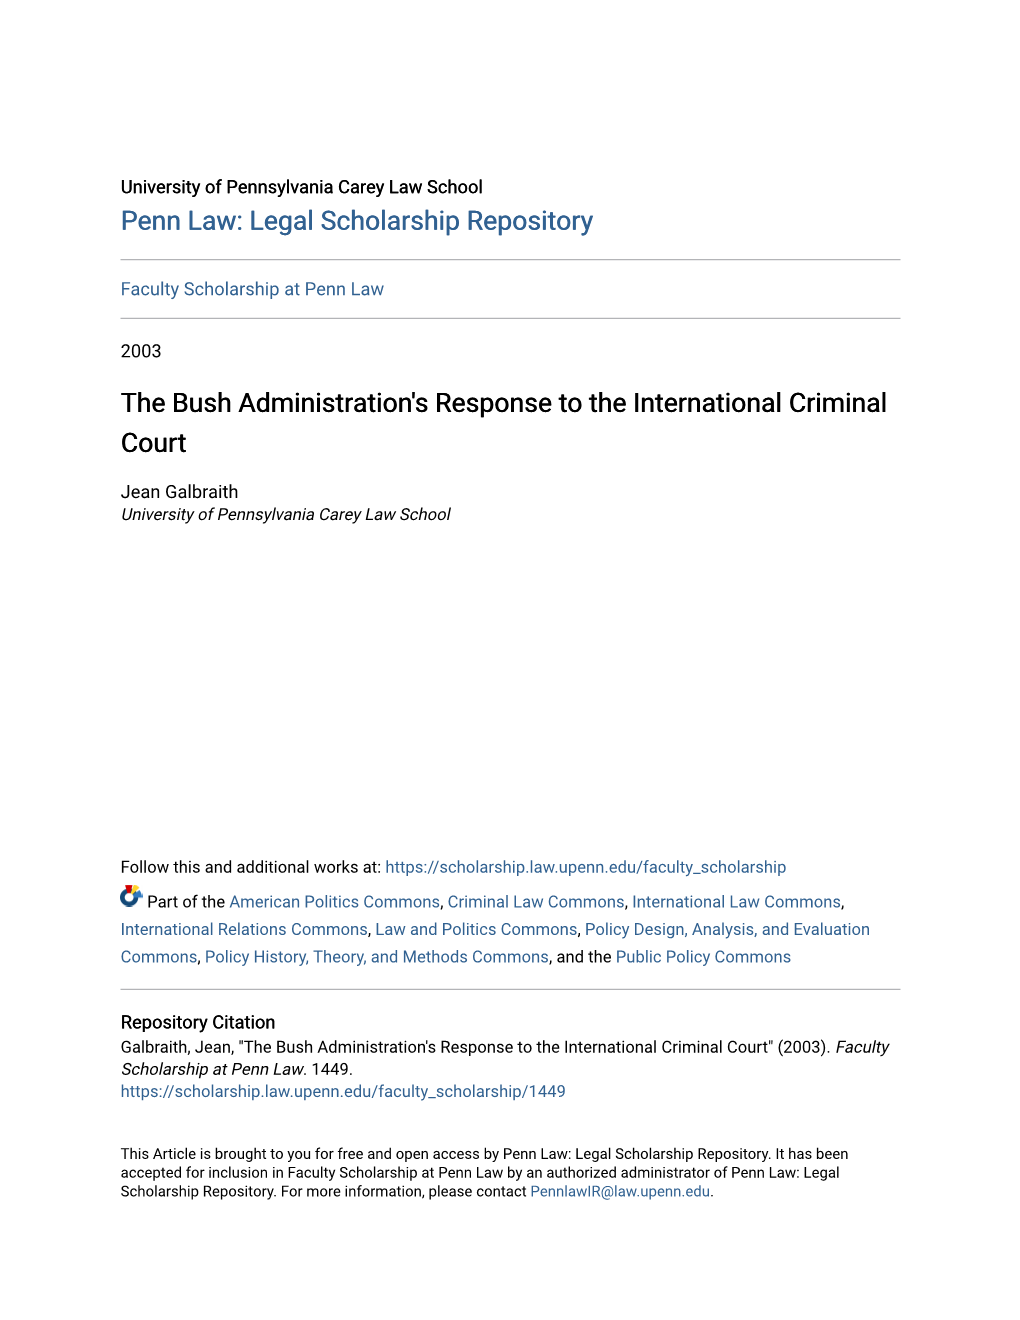 The Bush Administration's Response to the International Criminal Court